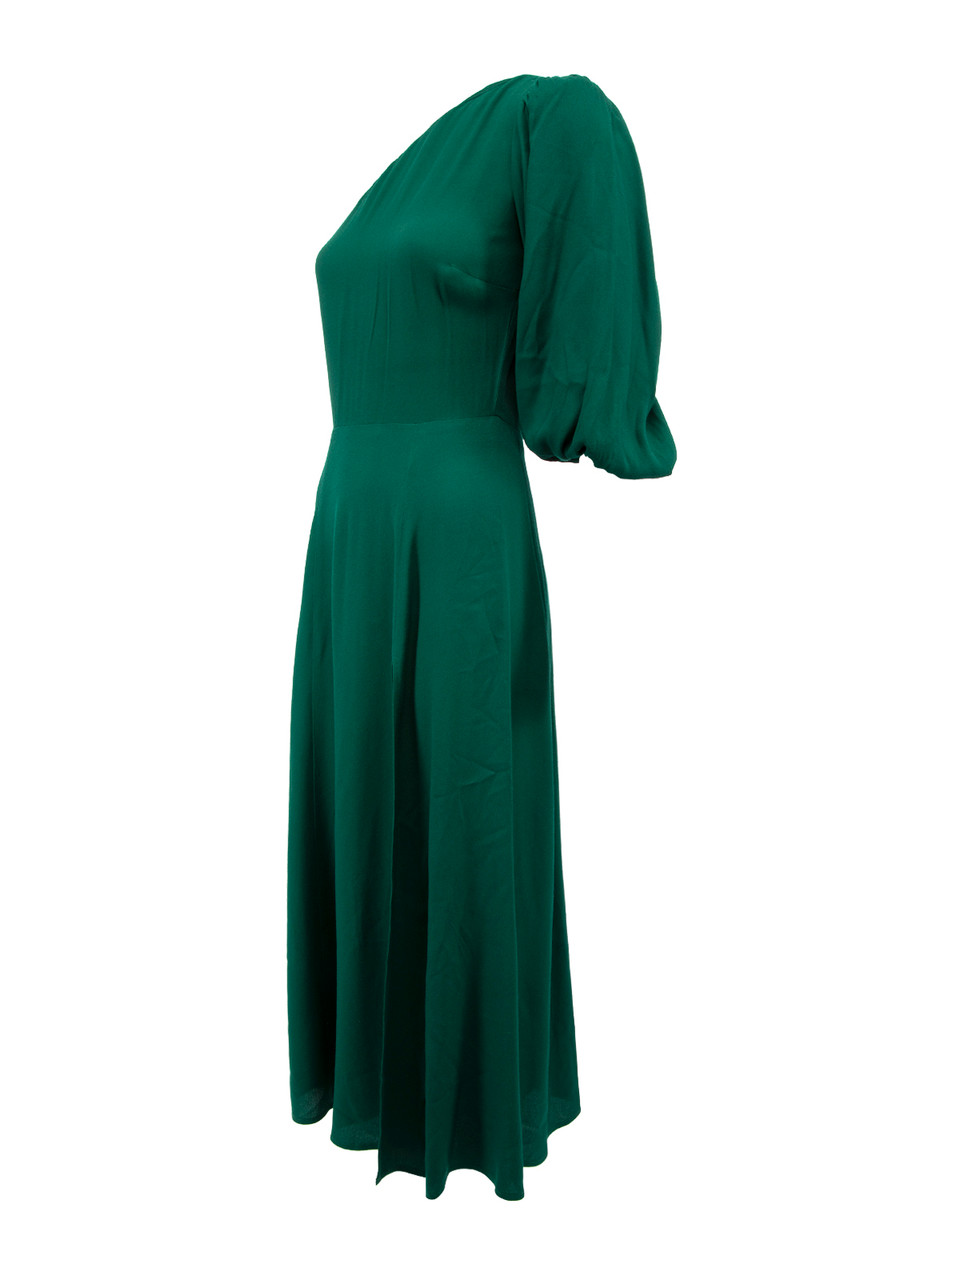 Reformation Green One Shoulder Dress with Thigh Slit